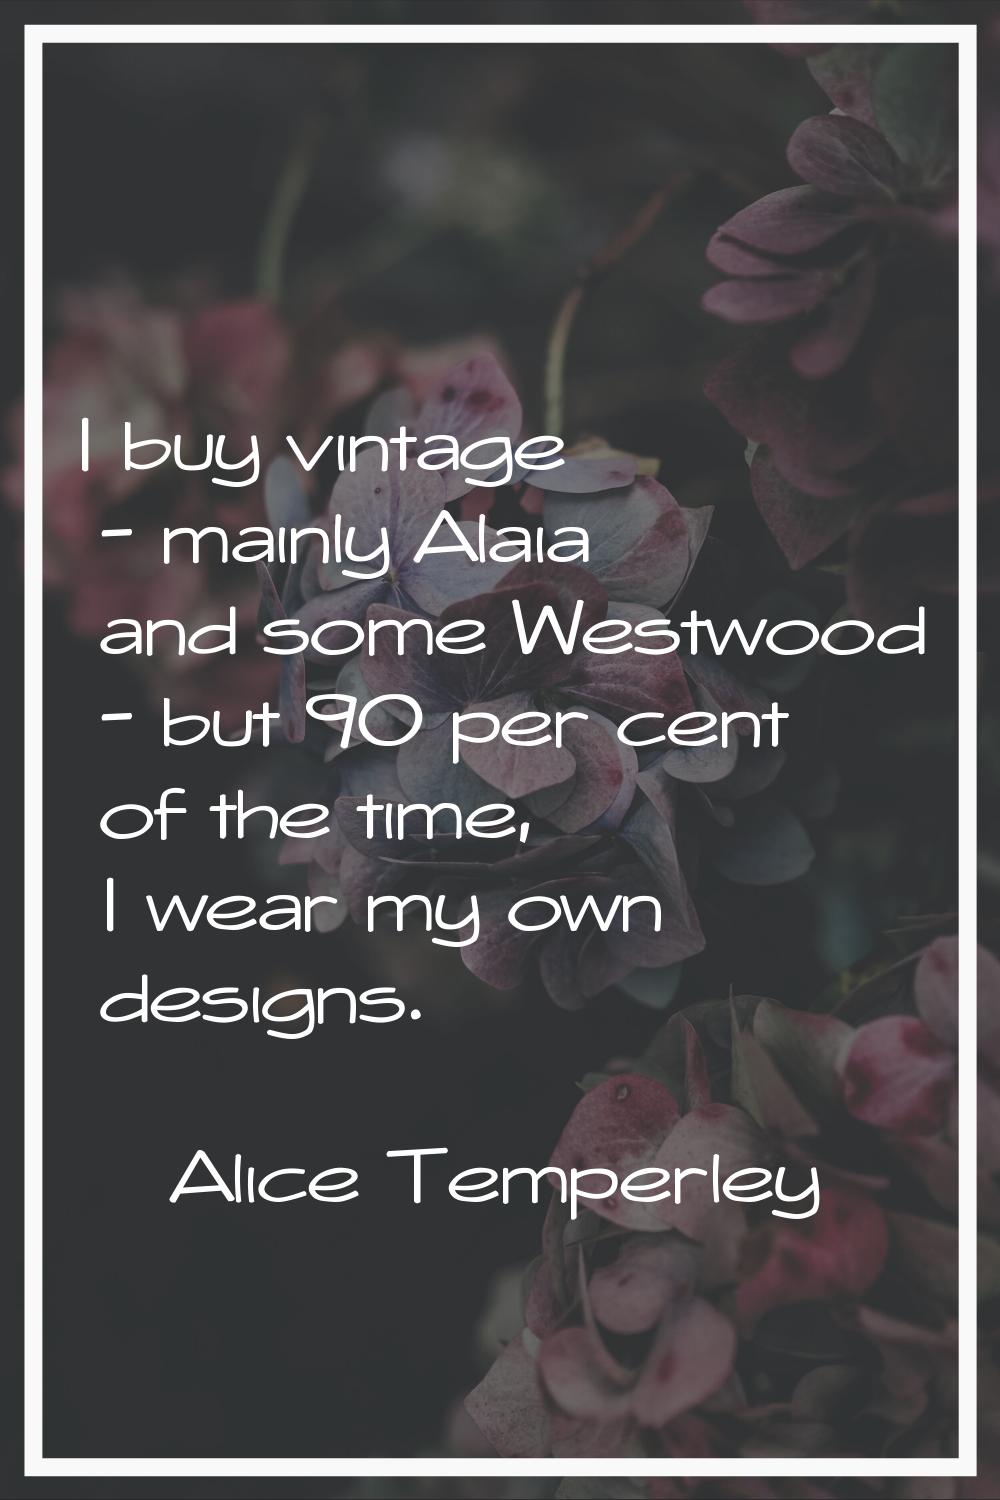 I buy vintage - mainly Alaia and some Westwood - but 90 per cent of the time, I wear my own designs